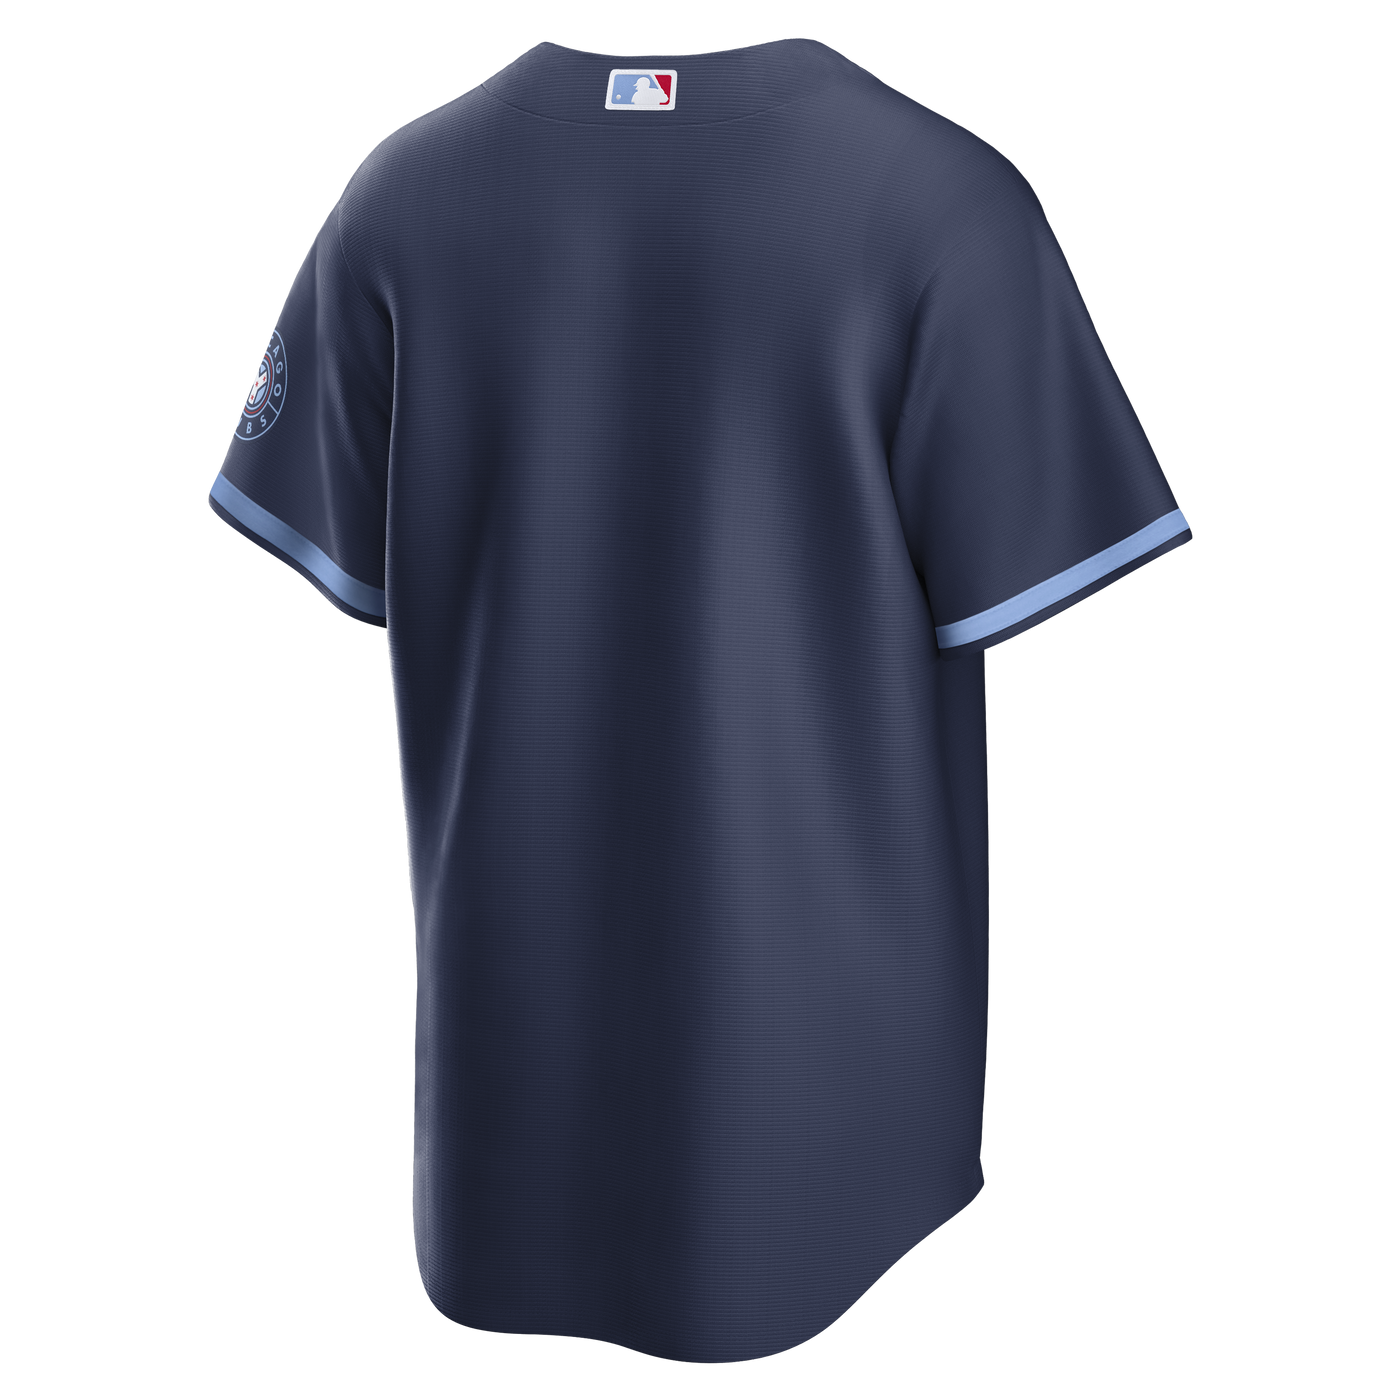 CITY CONNECT CHICAGO CUBS REPLICA JERSEY - Ivy Shop